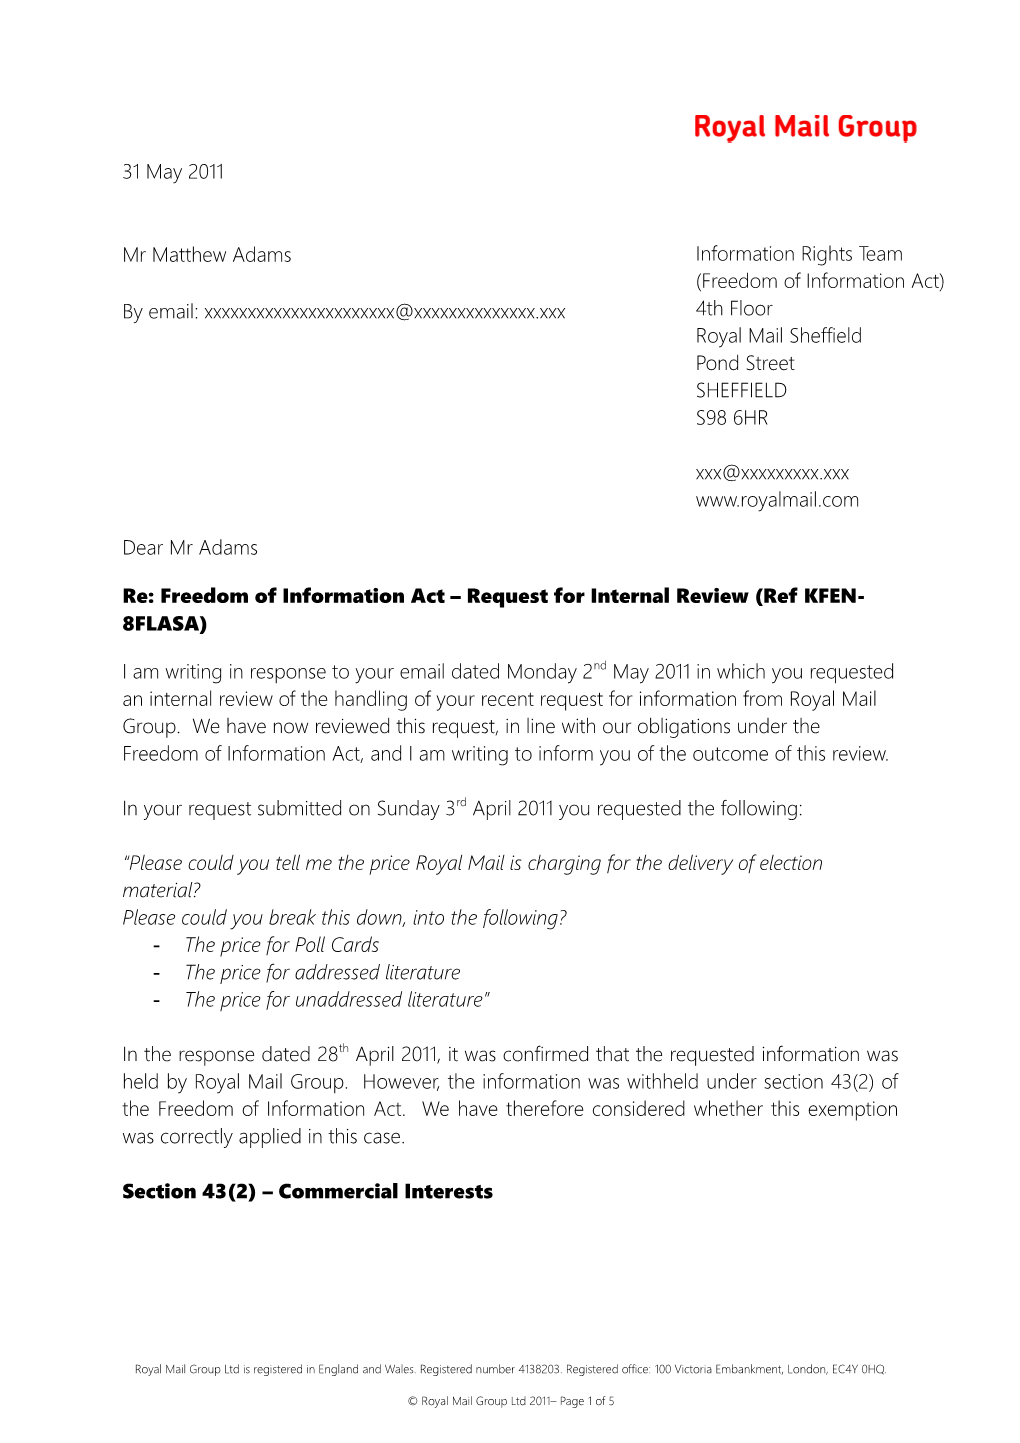 Re: Freedom of Information Act Request for Internal Review (Refkfen-8FLASA)